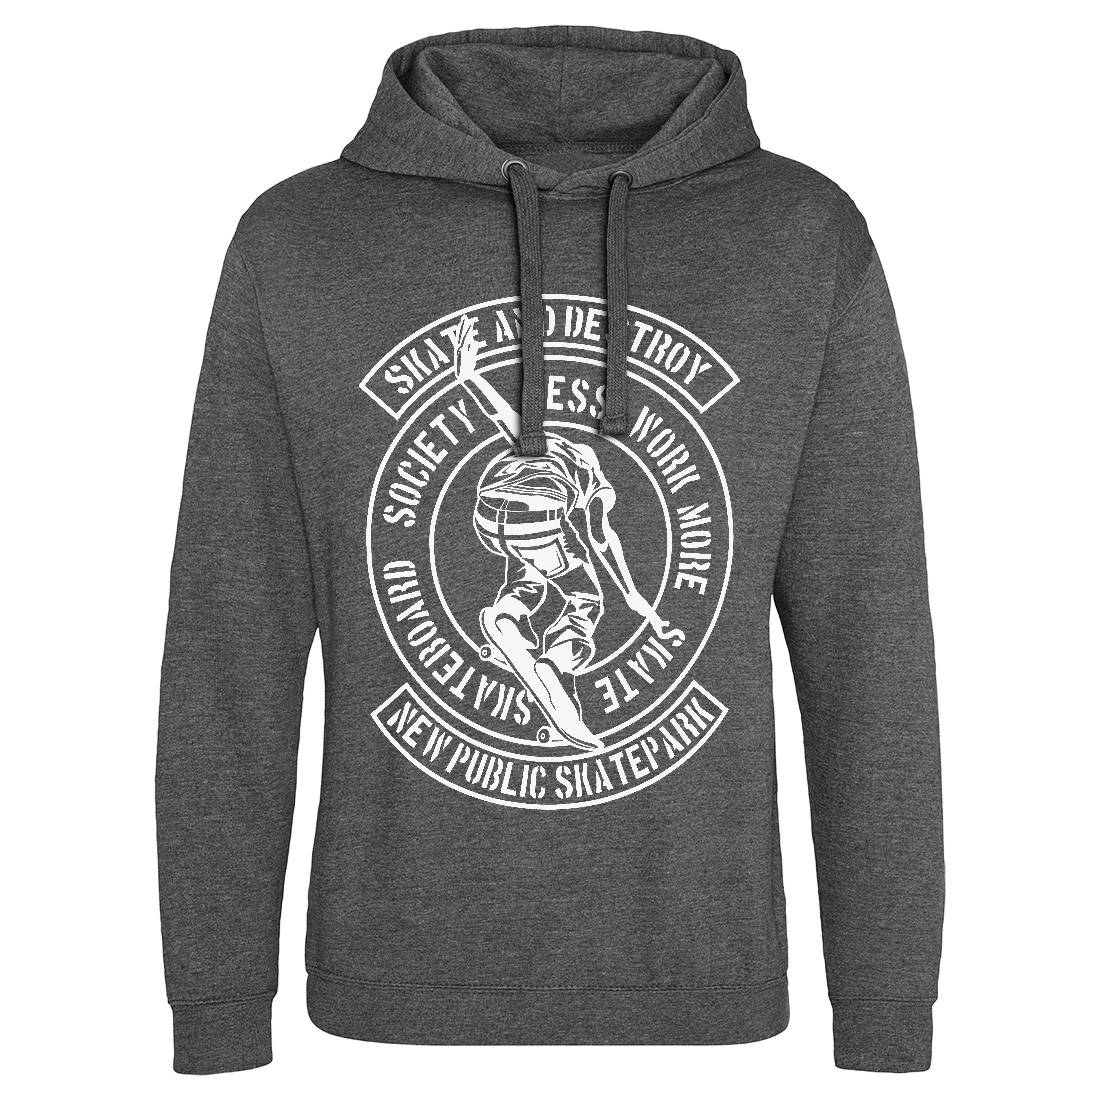 And Destroy Mens Hoodie Without Pocket Skate A142